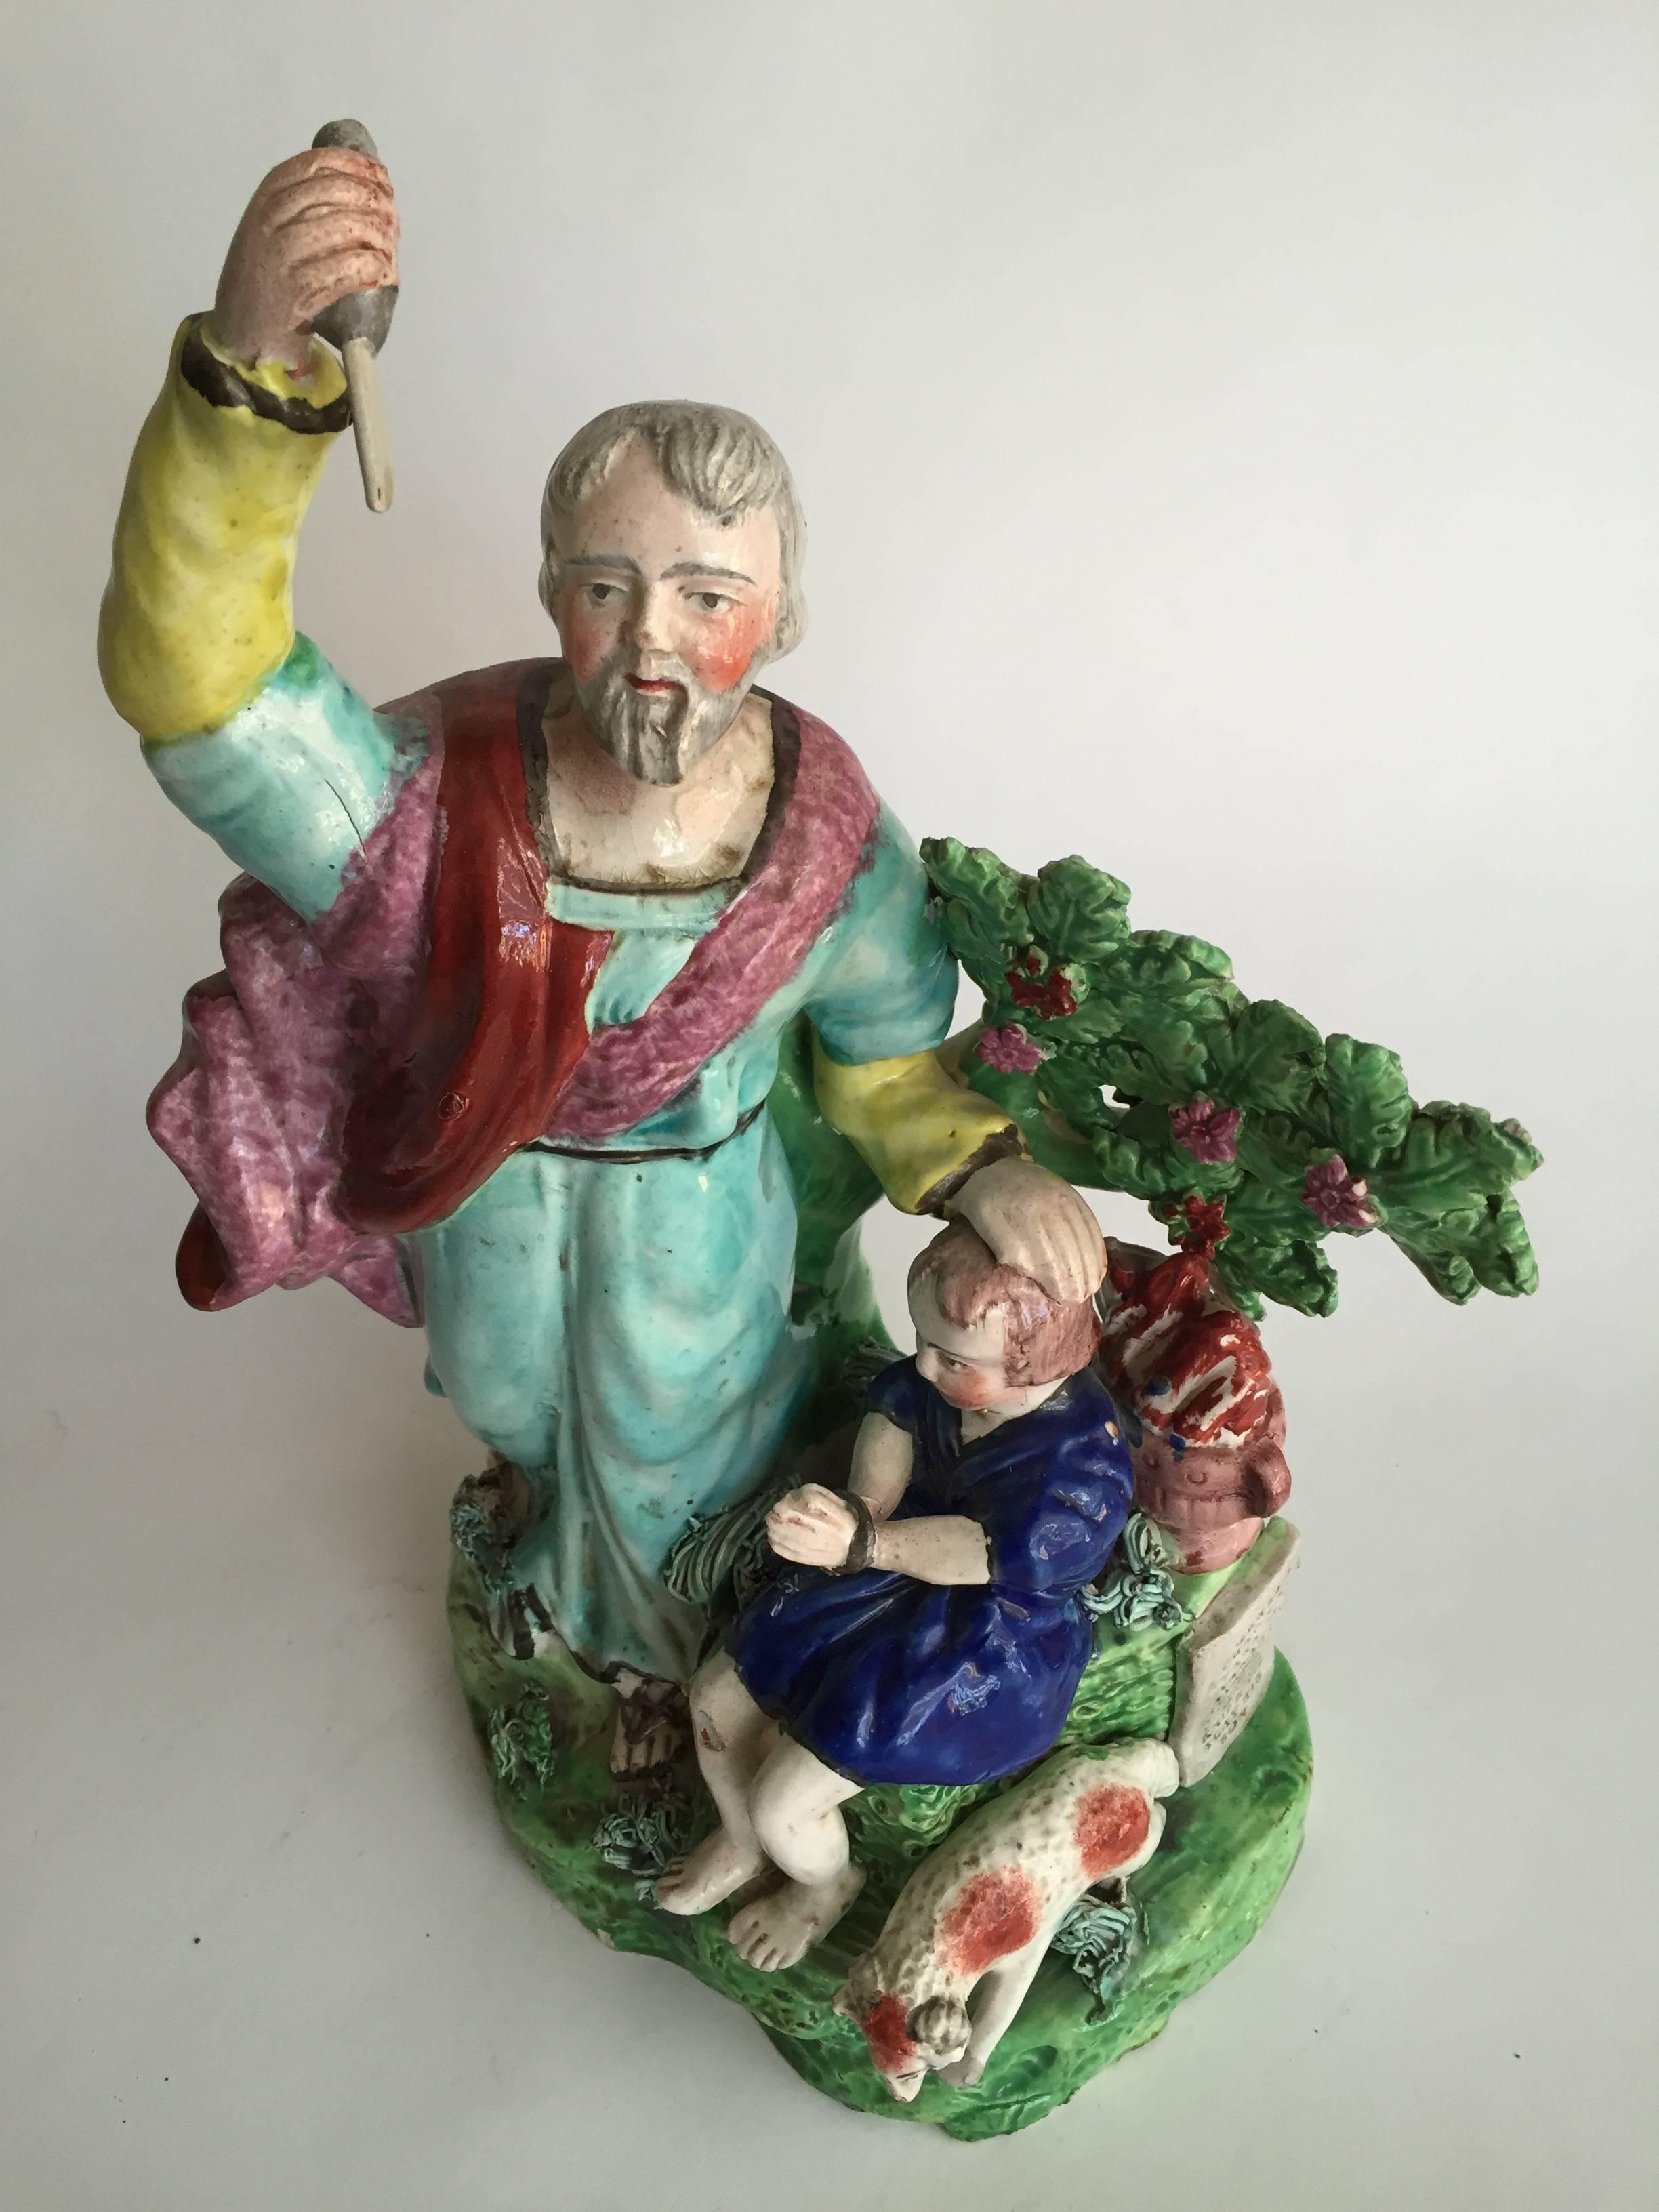 English Staffordshire Pottery rare figure of Abraham Offering to Slay Isaac. The somber figure of Abraham wielding a knife on the left side of the ovular, low-mounded green base, with the figure of Isaac seated under a tree issuing bocage to his